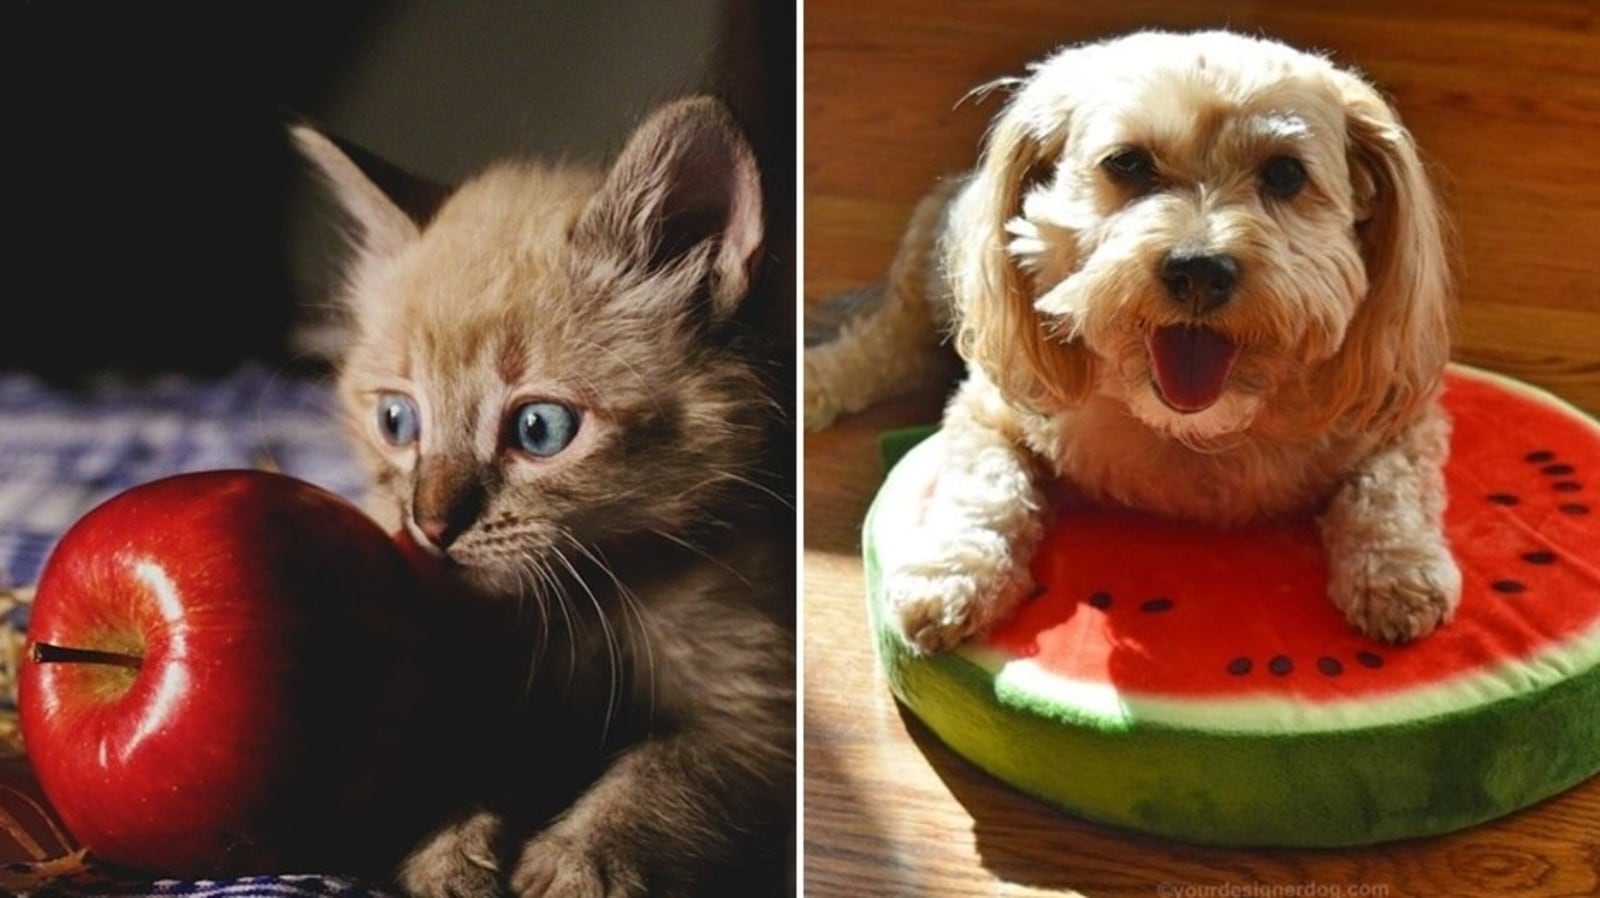 Pet nutrition: 5 healthy and tasty fruits for your pets